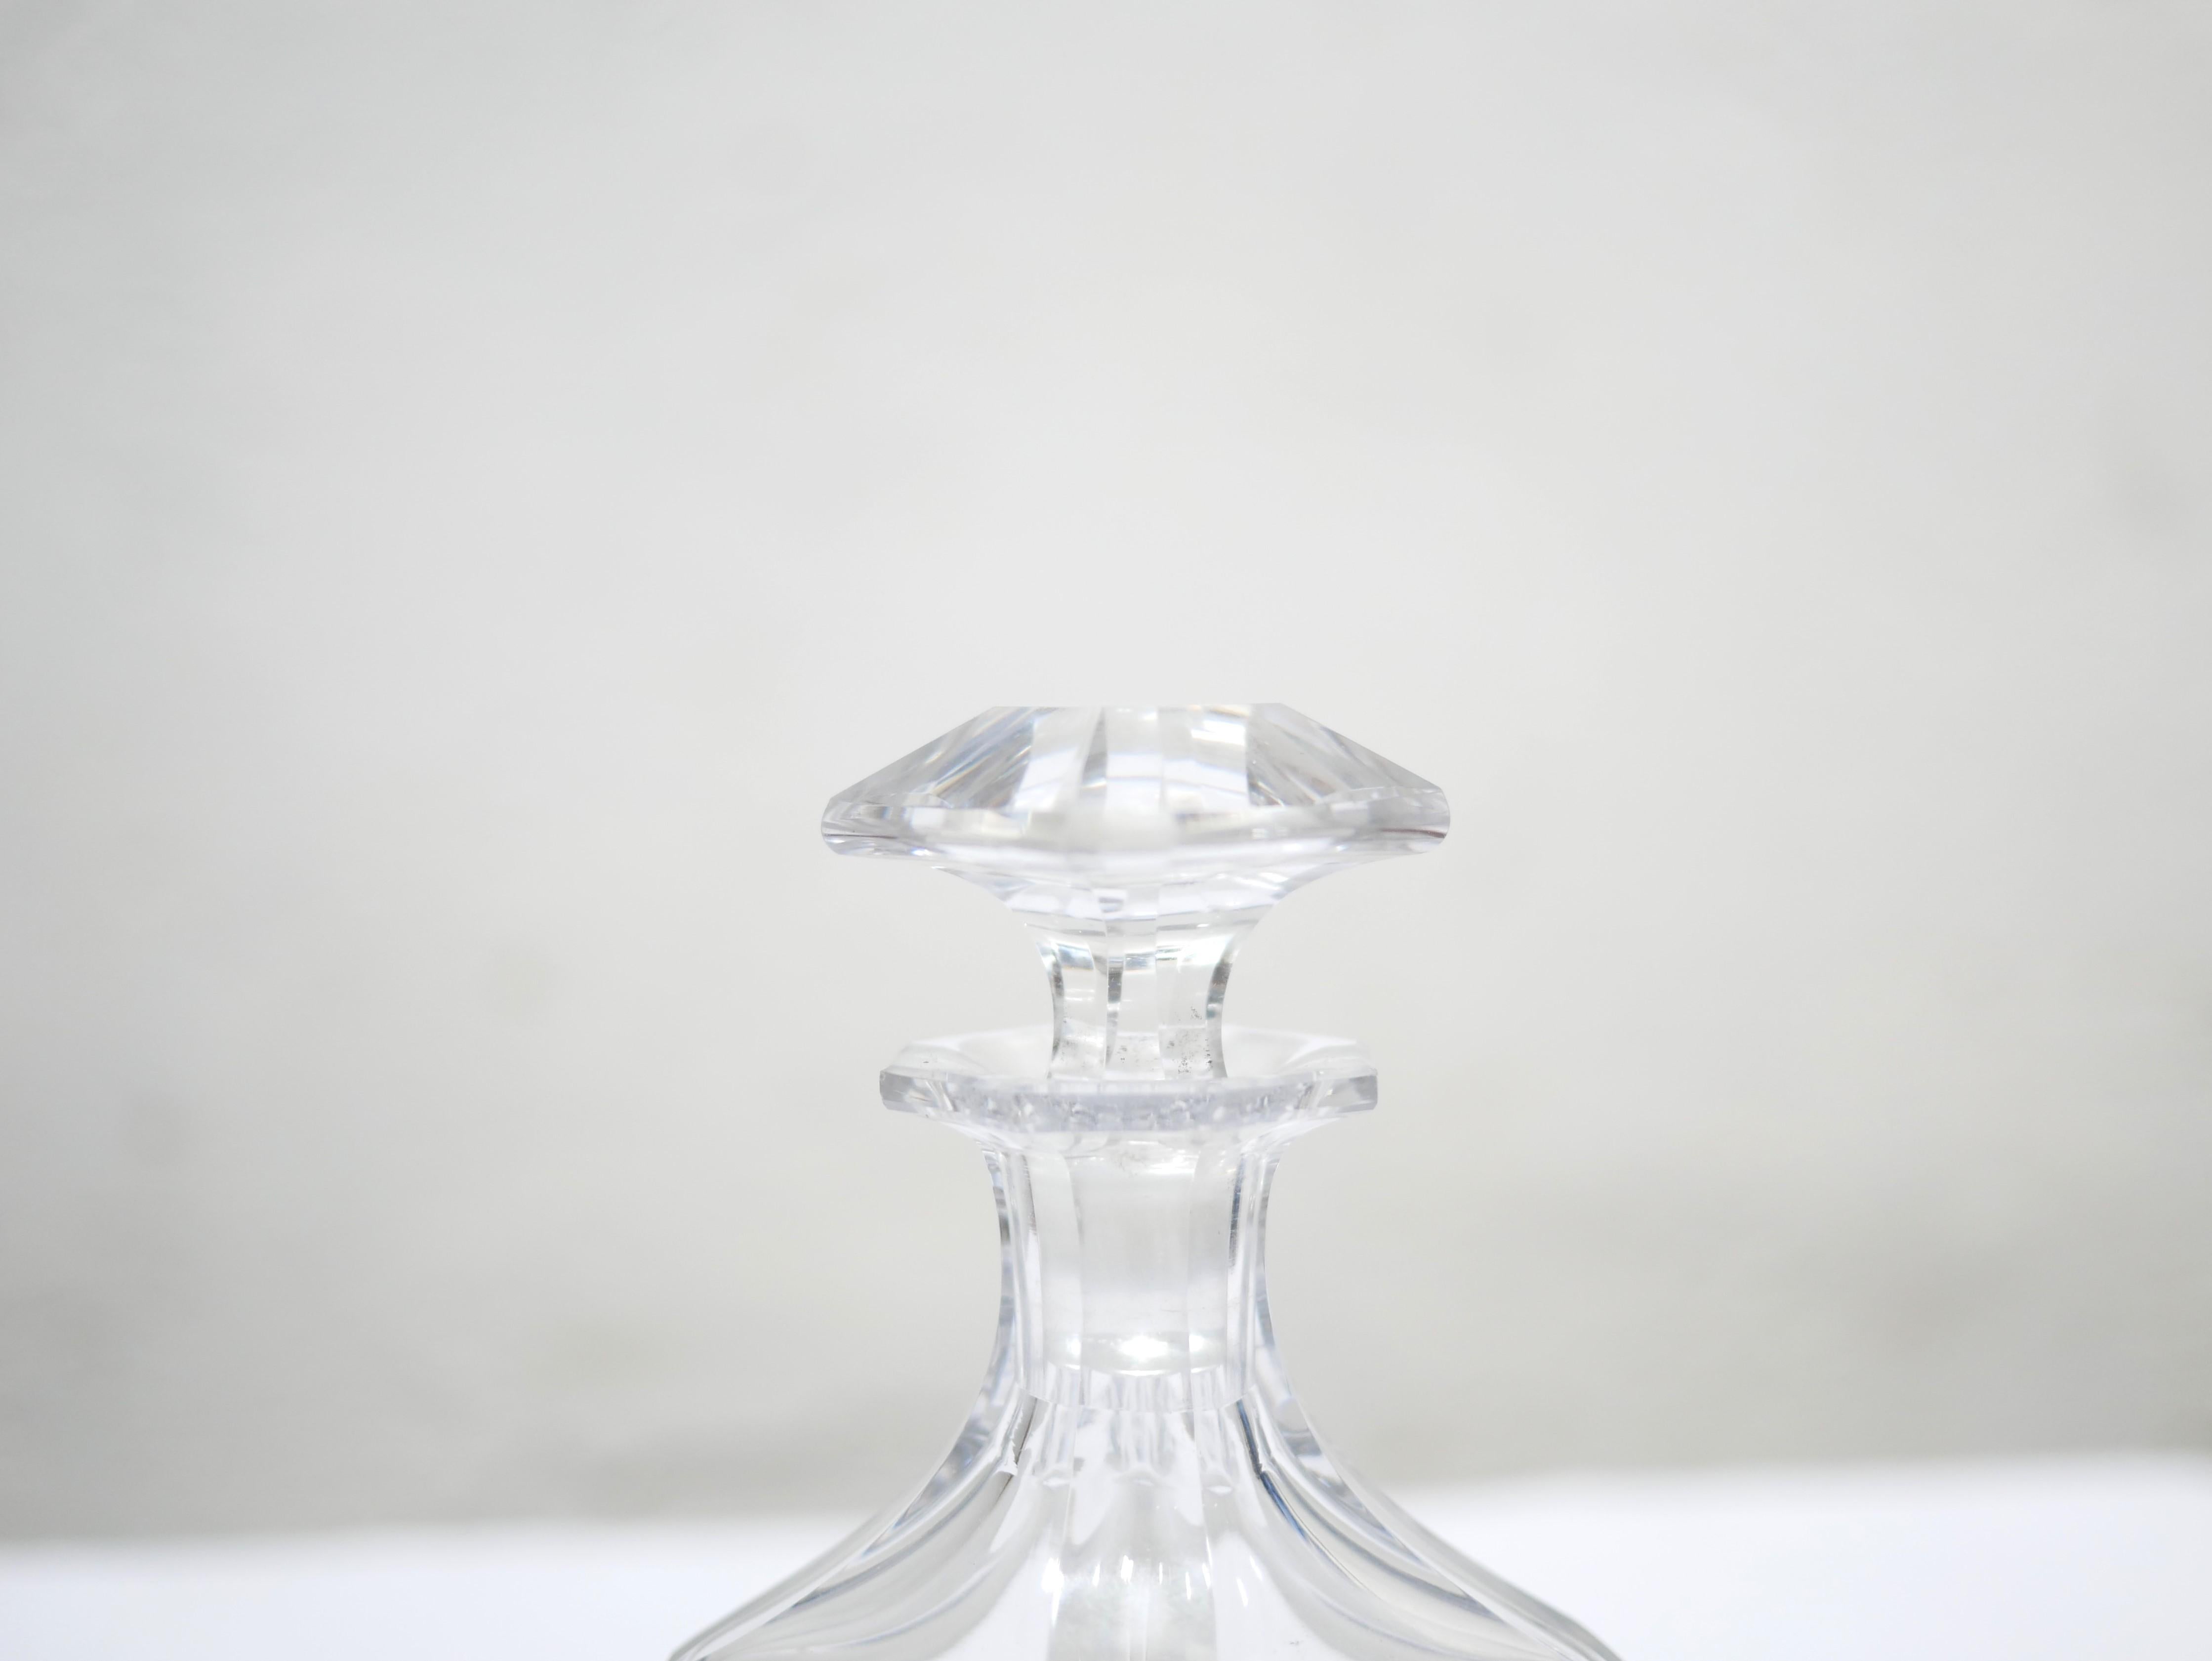 Glass liquor carafe from the 60s.

Its harmonious lines give it a lot of softness and charm.
On the kitchen shelves or in the bar area of ??the living room, it will give a trendy, vintage and very elegant touch to the decoration.

Good